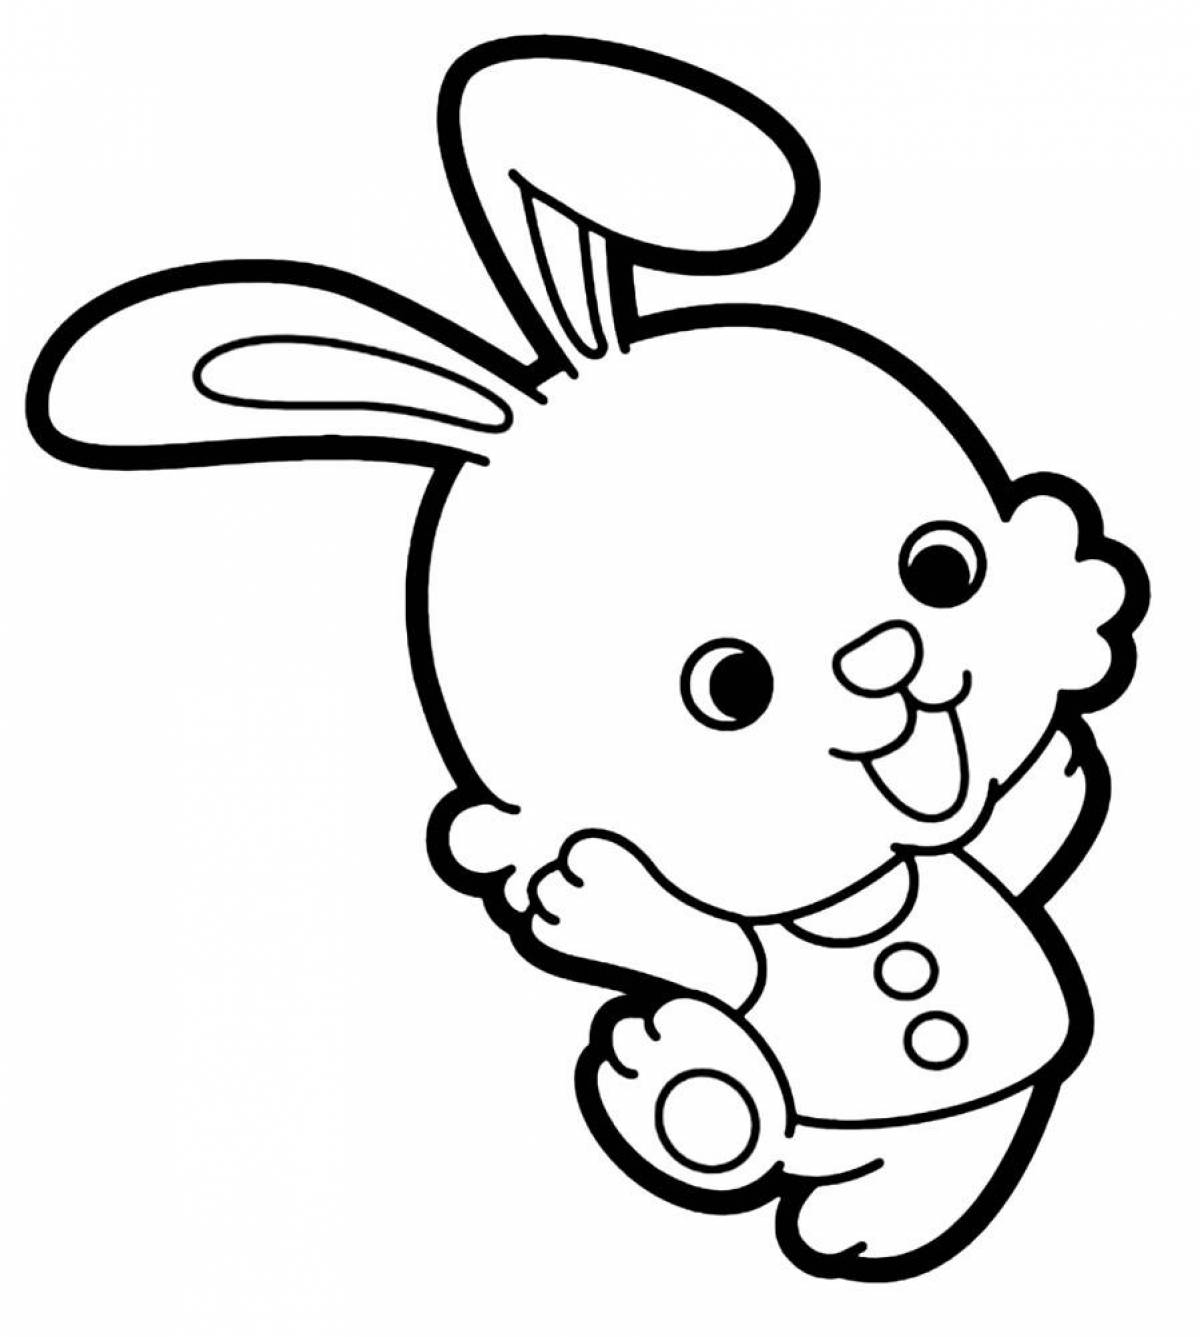 Joyful coloring page bunny picture